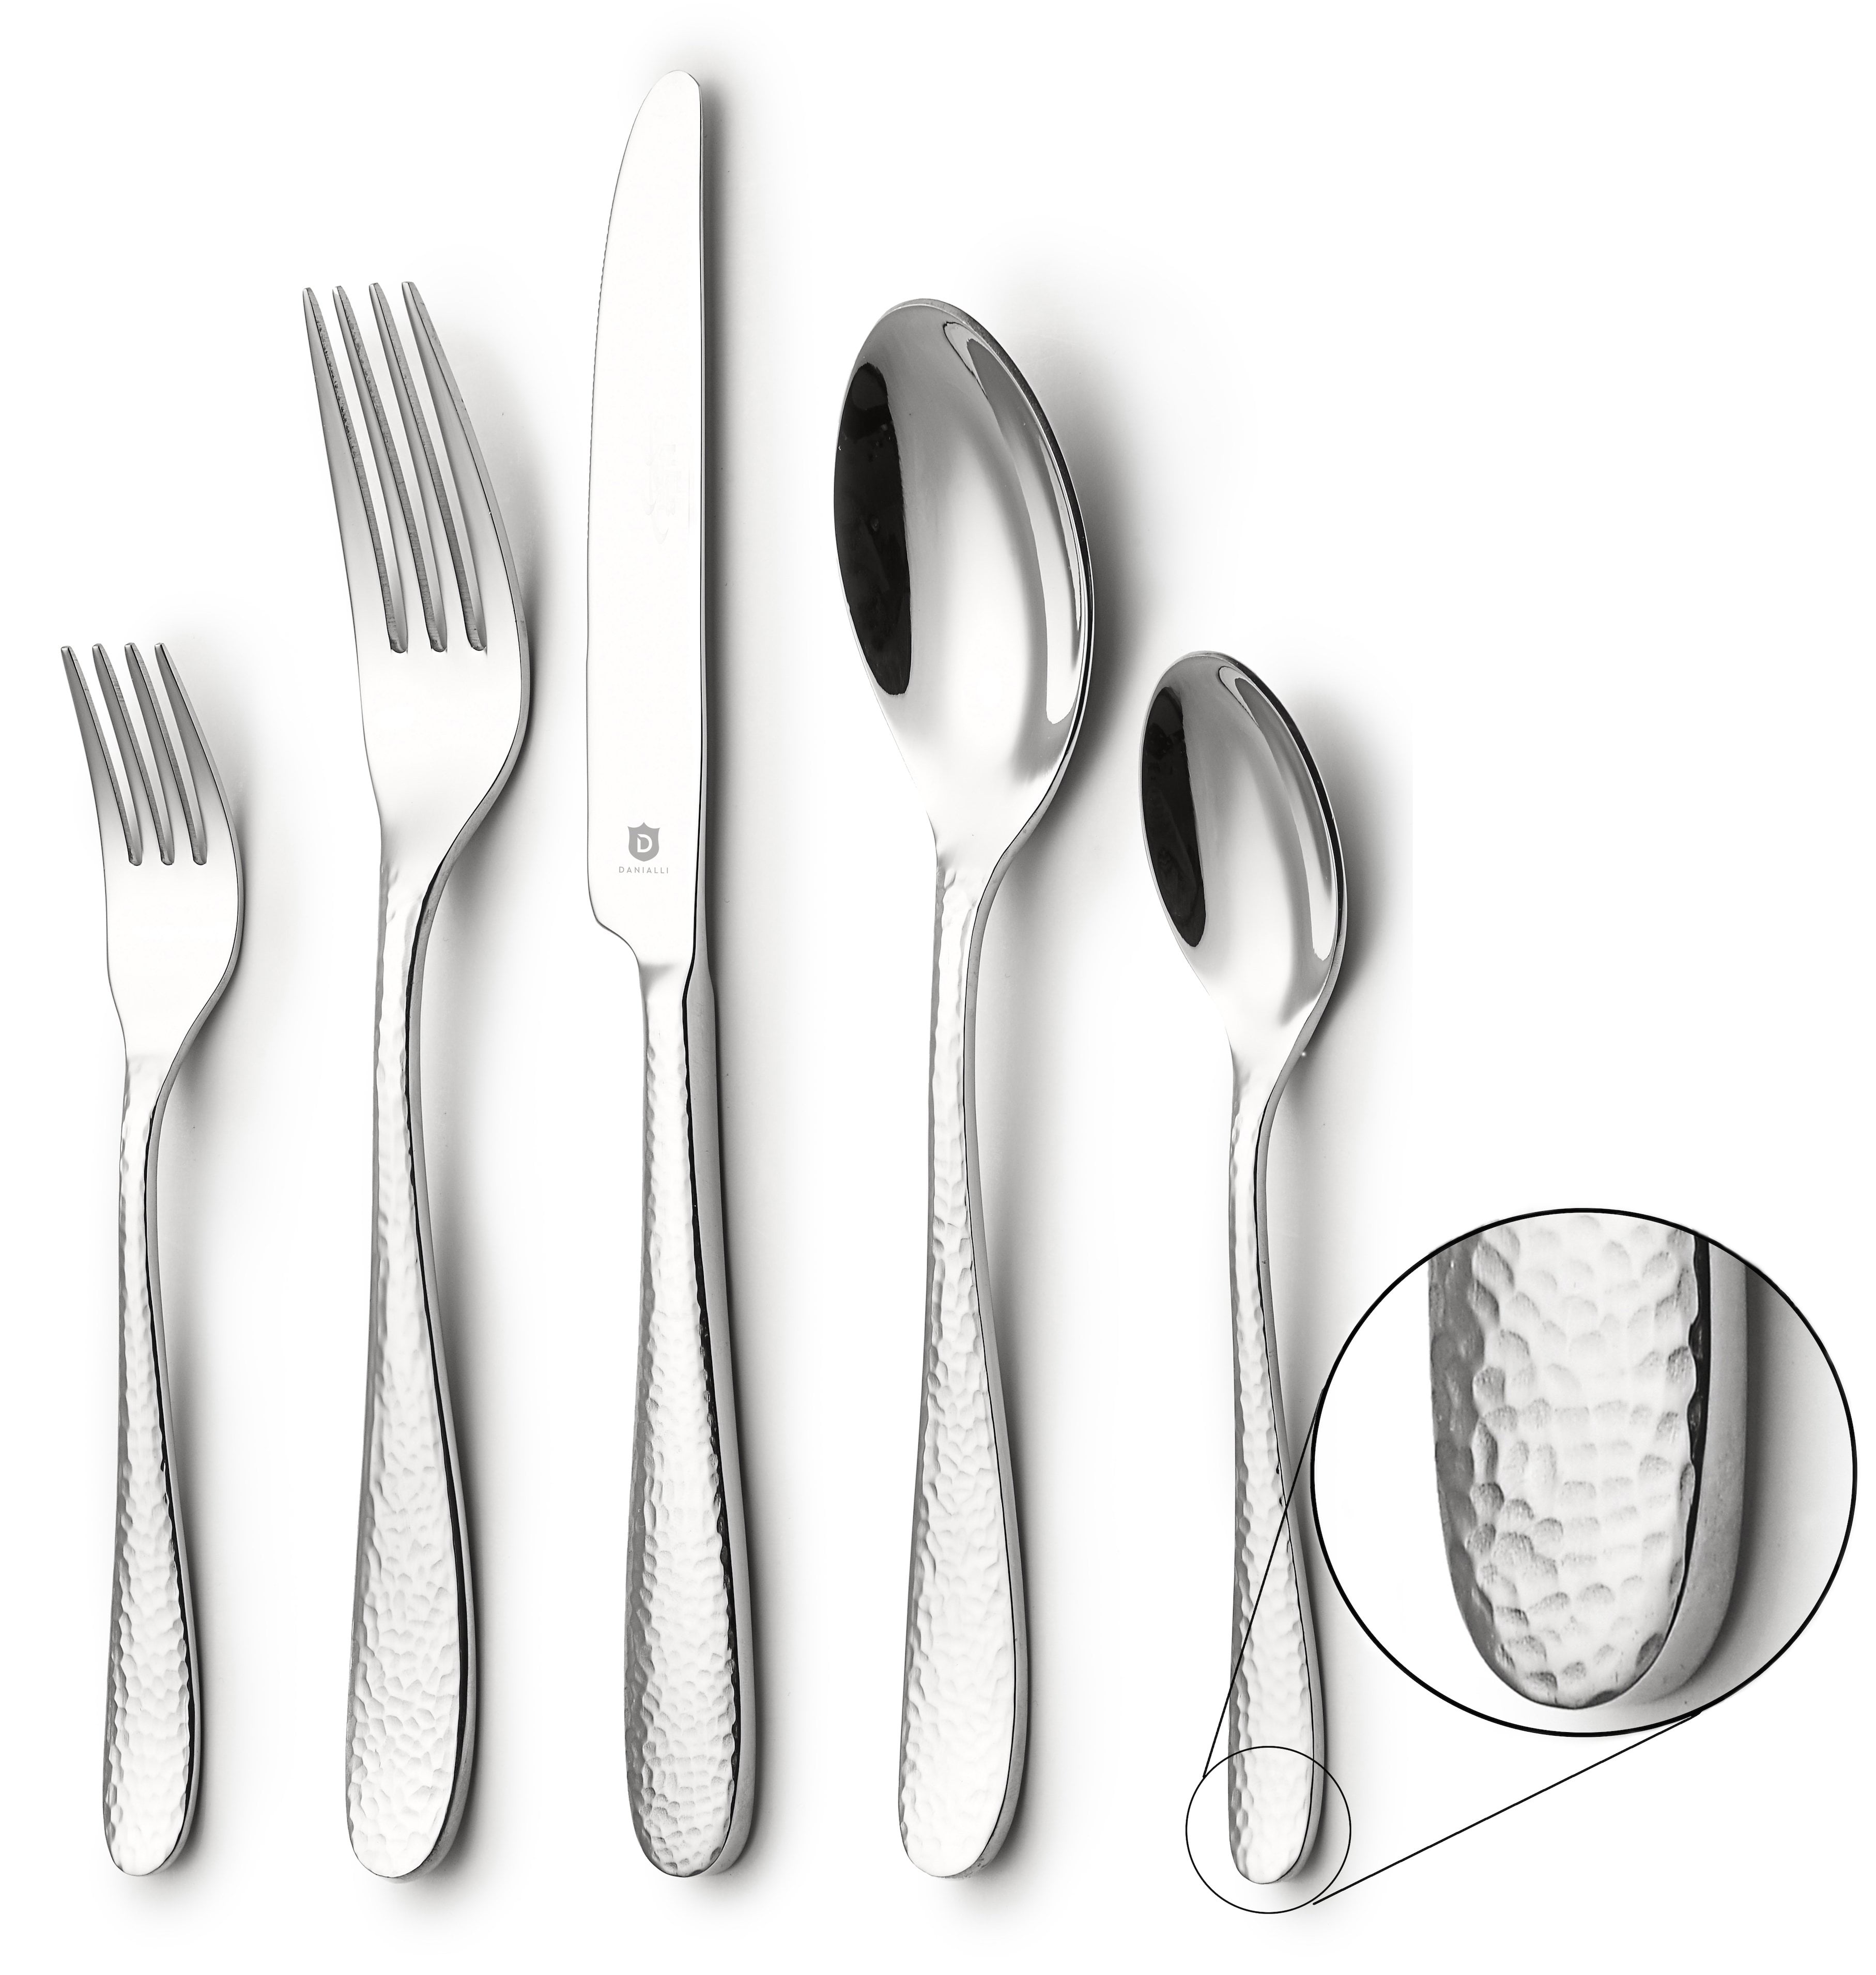 10 Stainless Steel Elegant Flatware Set 20 Pieces for 4 person Silverware 18 